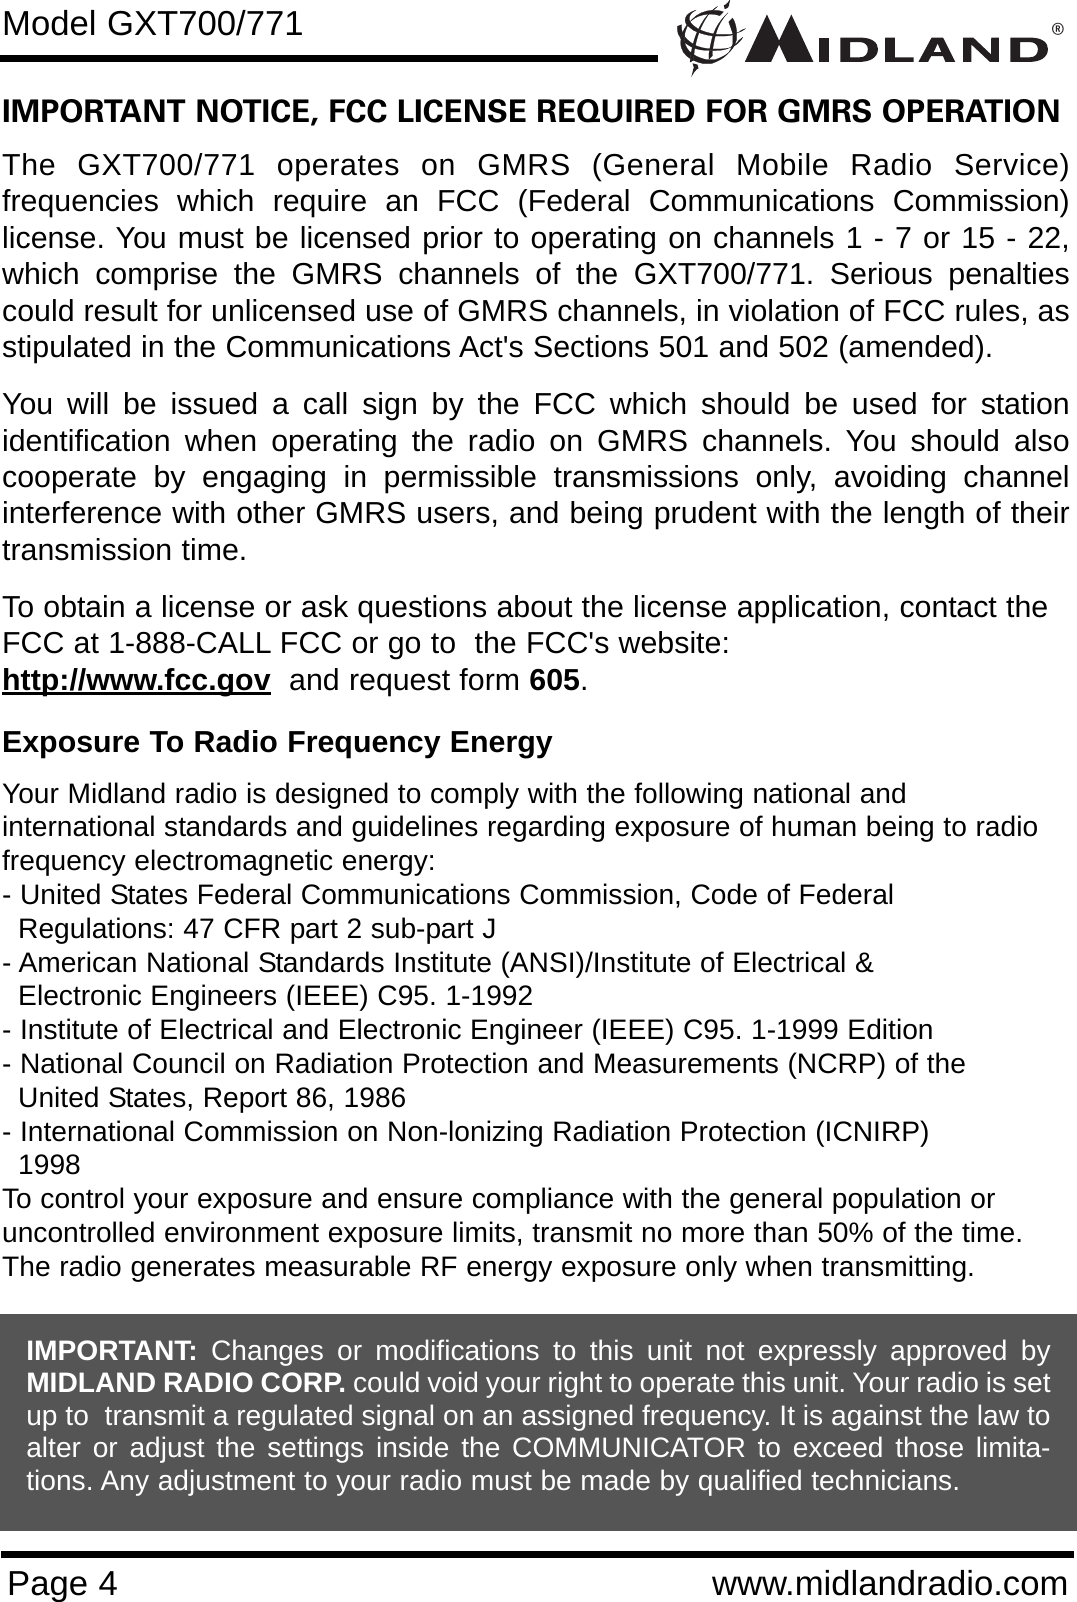 ®Page 4 www.midlandradio.comIMPORTANT NOTICE, FCC LICENSE REQUIRED FOR GMRS OPERATIONThe GXT700/771 operates on GMRS (General Mobile Radio Service)frequencies which require an FCC (Federal Communications Commission)license. You must be licensed prior to operating on channels 1 - 7 or 15 - 22,which comprise the GMRS channels of the GXT700/771. Serious penaltiescould result for unlicensed use of GMRS channels, in violation of FCC rules, asstipulated in the Communications Act&apos;s Sections 501 and 502 (amended).You will be issued a call sign by the FCC which should be used for stationidentification when operating the radio on GMRS channels. You should alsocooperate by engaging in permissible transmissions only, avoiding channelinterference with other GMRS users, and being prudent with the length of theirtransmission time.To obtain a license or ask questions about the license application, contact theFCC at 1-888-CALL FCC or go to  the FCC&apos;s website:  http://www.fcc.gov and request form 605.Exposure To Radio Frequency EnergyYour Midland radio is designed to comply with the following national and international standards and guidelines regarding exposure of human being to radiofrequency electromagnetic energy:- United States Federal Communications Commission, Code of Federal Regulations: 47 CFR part 2 sub-part J- American National Standards Institute (ANSI)/Institute of Electrical &amp; Electronic Engineers (IEEE) C95. 1-1992- Institute of Electrical and Electronic Engineer (IEEE) C95. 1-1999 Edition- National Council on Radiation Protection and Measurements (NCRP) of the United States, Report 86, 1986- International Commission on Non-lonizing Radiation Protection (ICNIRP) 1998To control your exposure and ensure compliance with the general population oruncontrolled environment exposure limits, transmit no more than 50% of the time.The radio generates measurable RF energy exposure only when transmitting.Model GXT700/771IMPORTANT: Changes or modifications to this unit not expressly approved byMIDLAND RADIO CORP. could void your right to operate this unit. Your radio is setup to  transmit a regulated signal on an assigned frequency. It is against the law toalter or adjust the settings inside the COMMUNICATOR to exceed those limita-tions. Any adjustment to your radio must be made by qualified technicians.